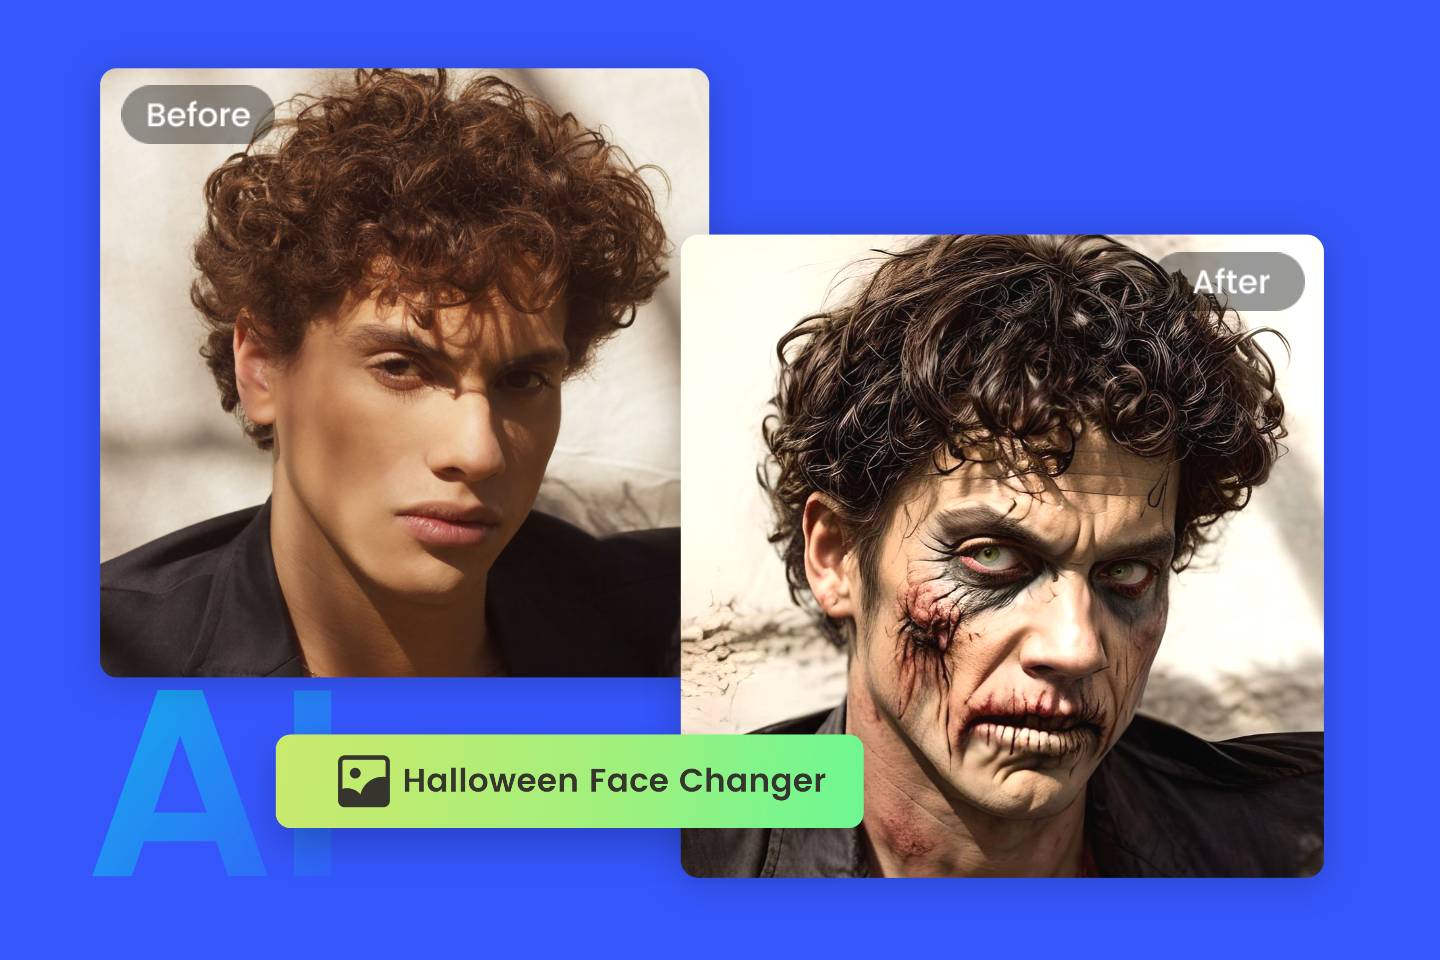 Use fotor halloween face changer to change male face to zombie face